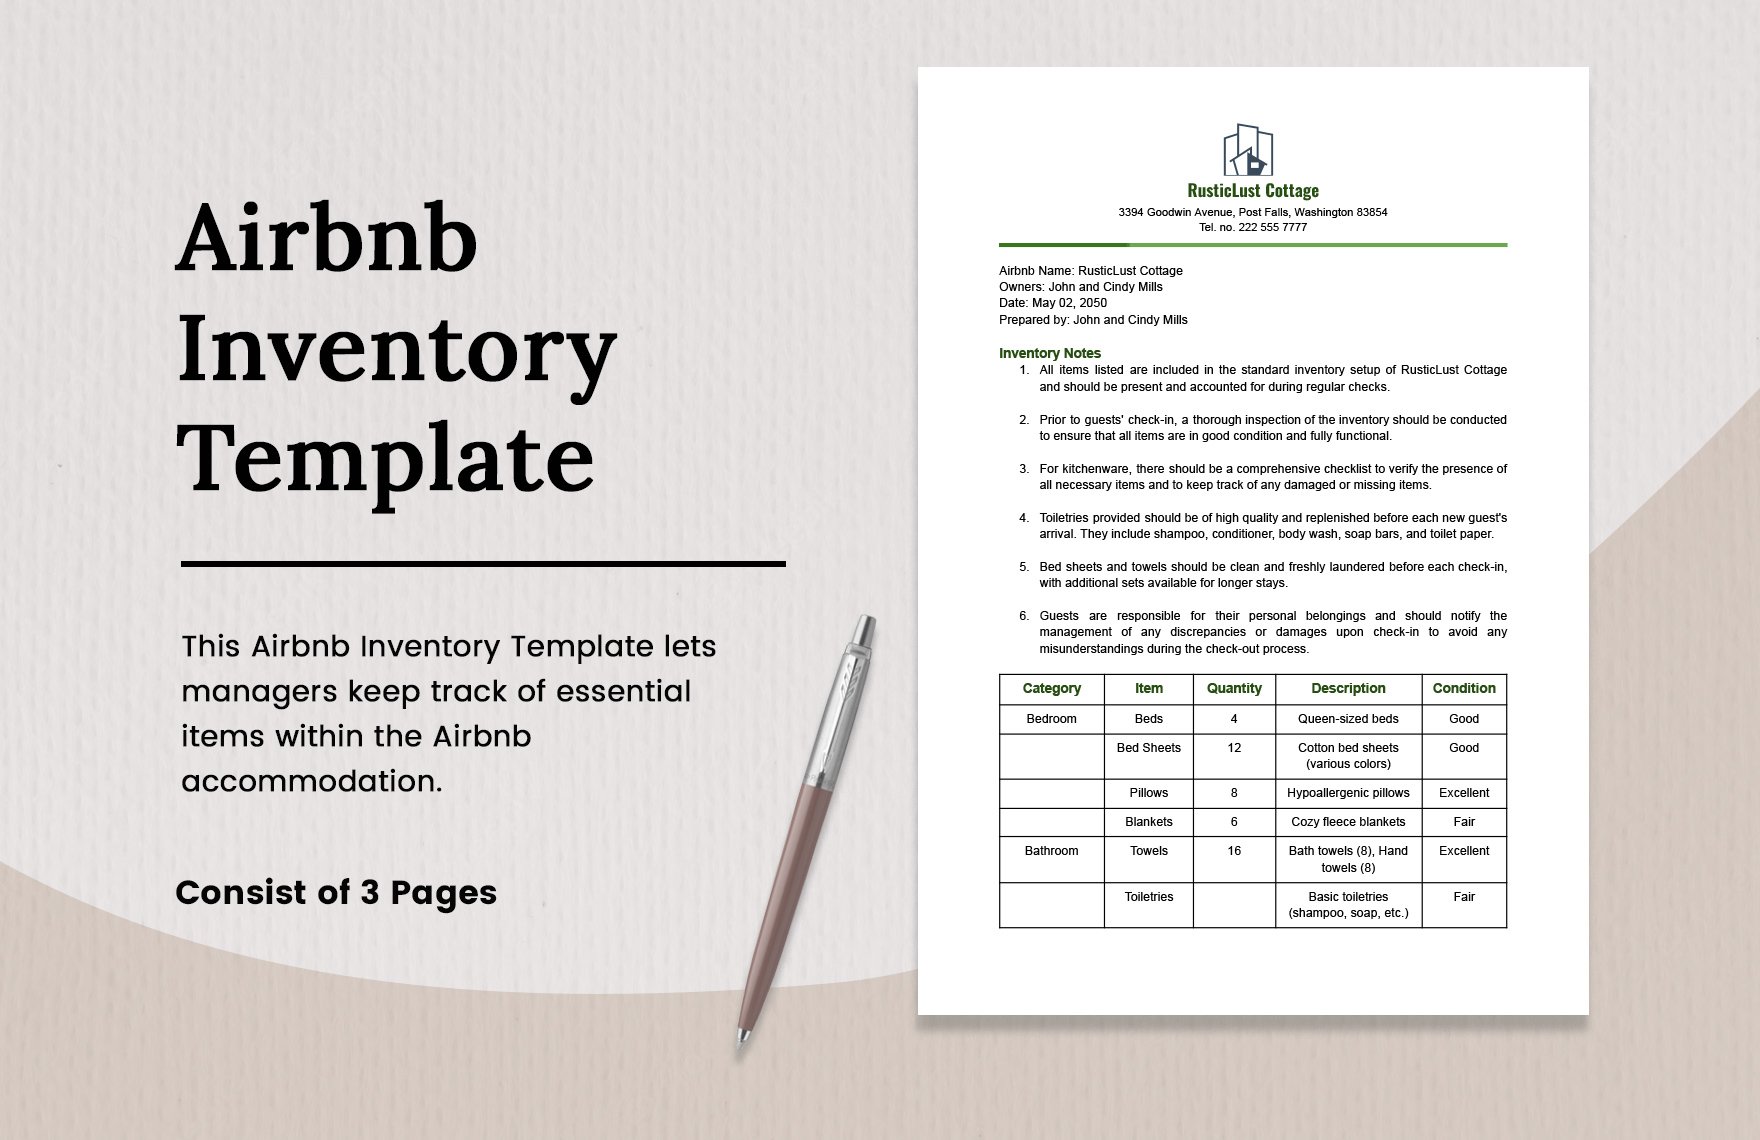 Airbnb Inventory Template